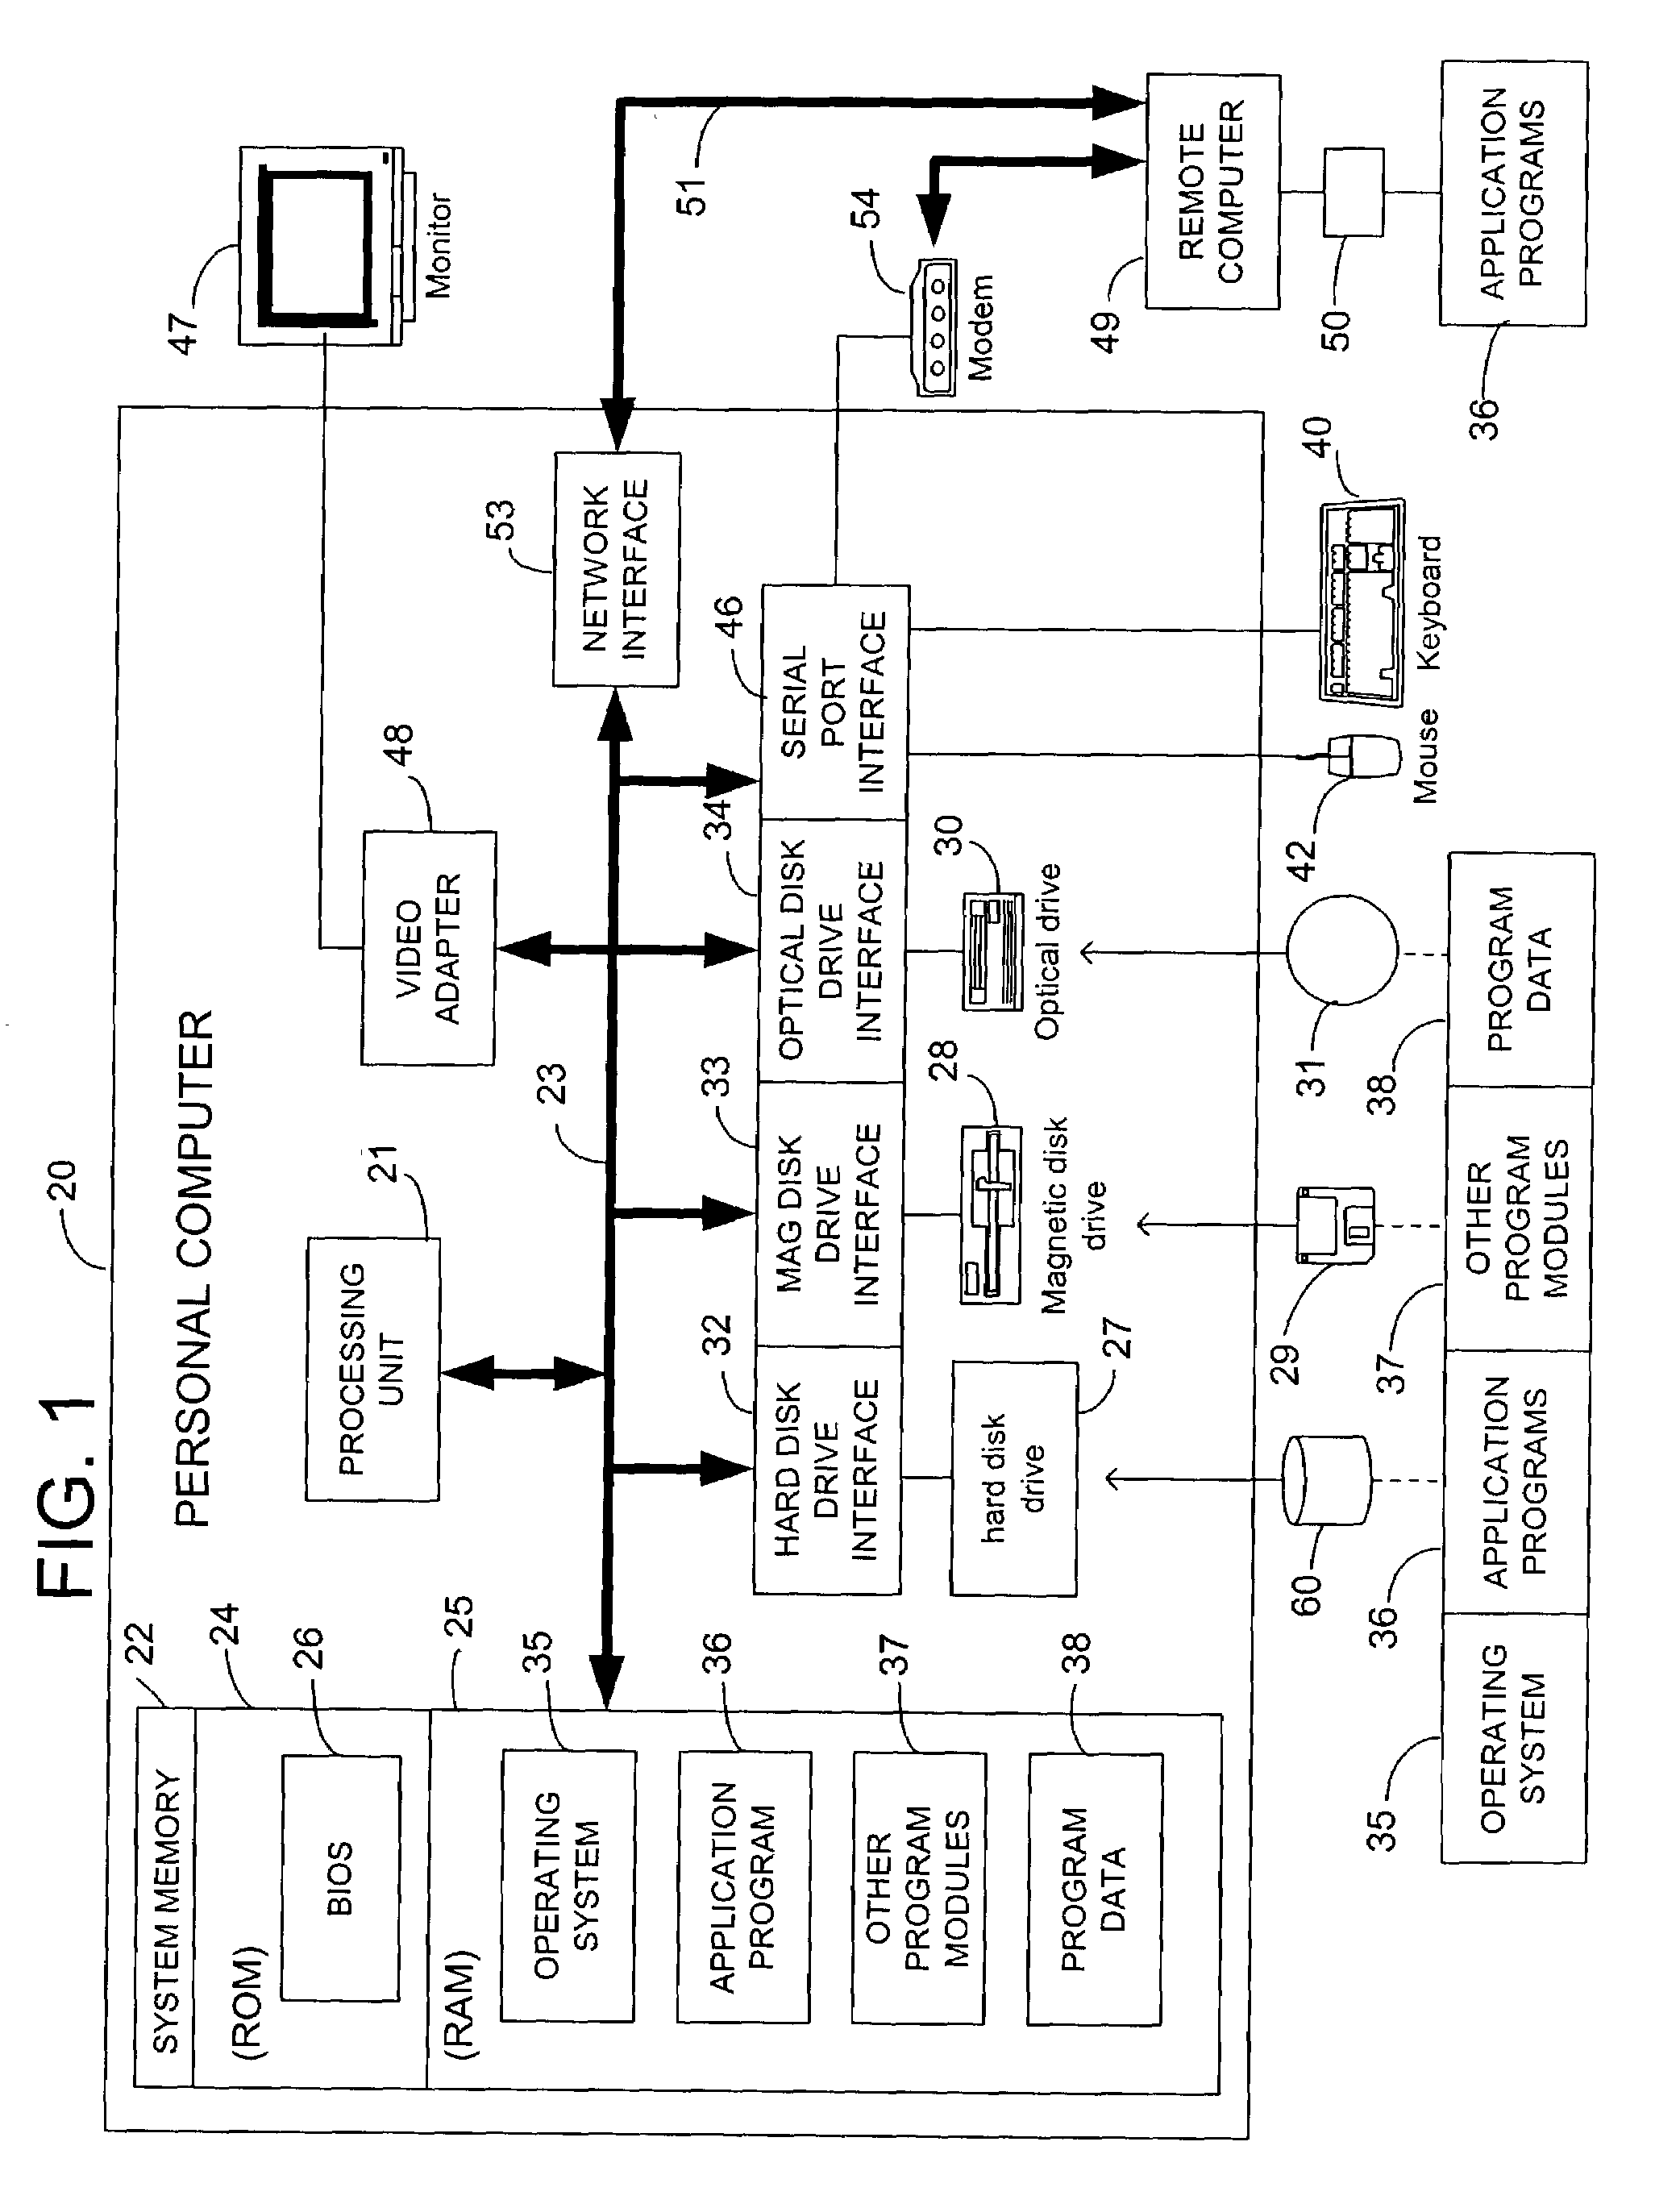 Method and system for modifying schema definitions